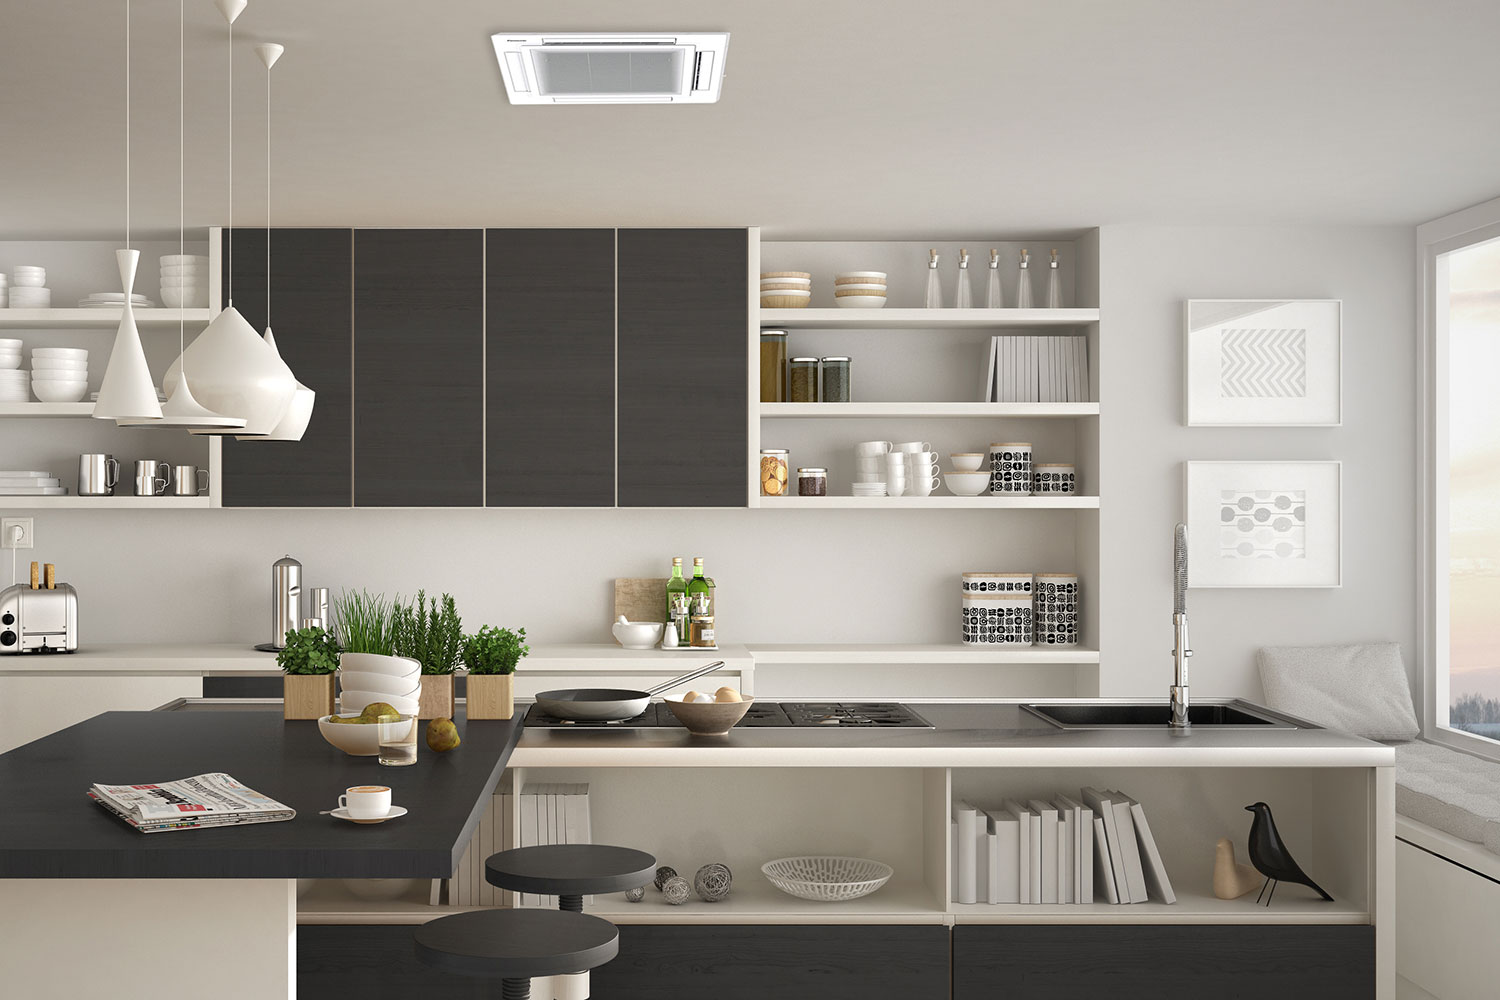 Panasonic Kitchen Lifestyle with ducted AC